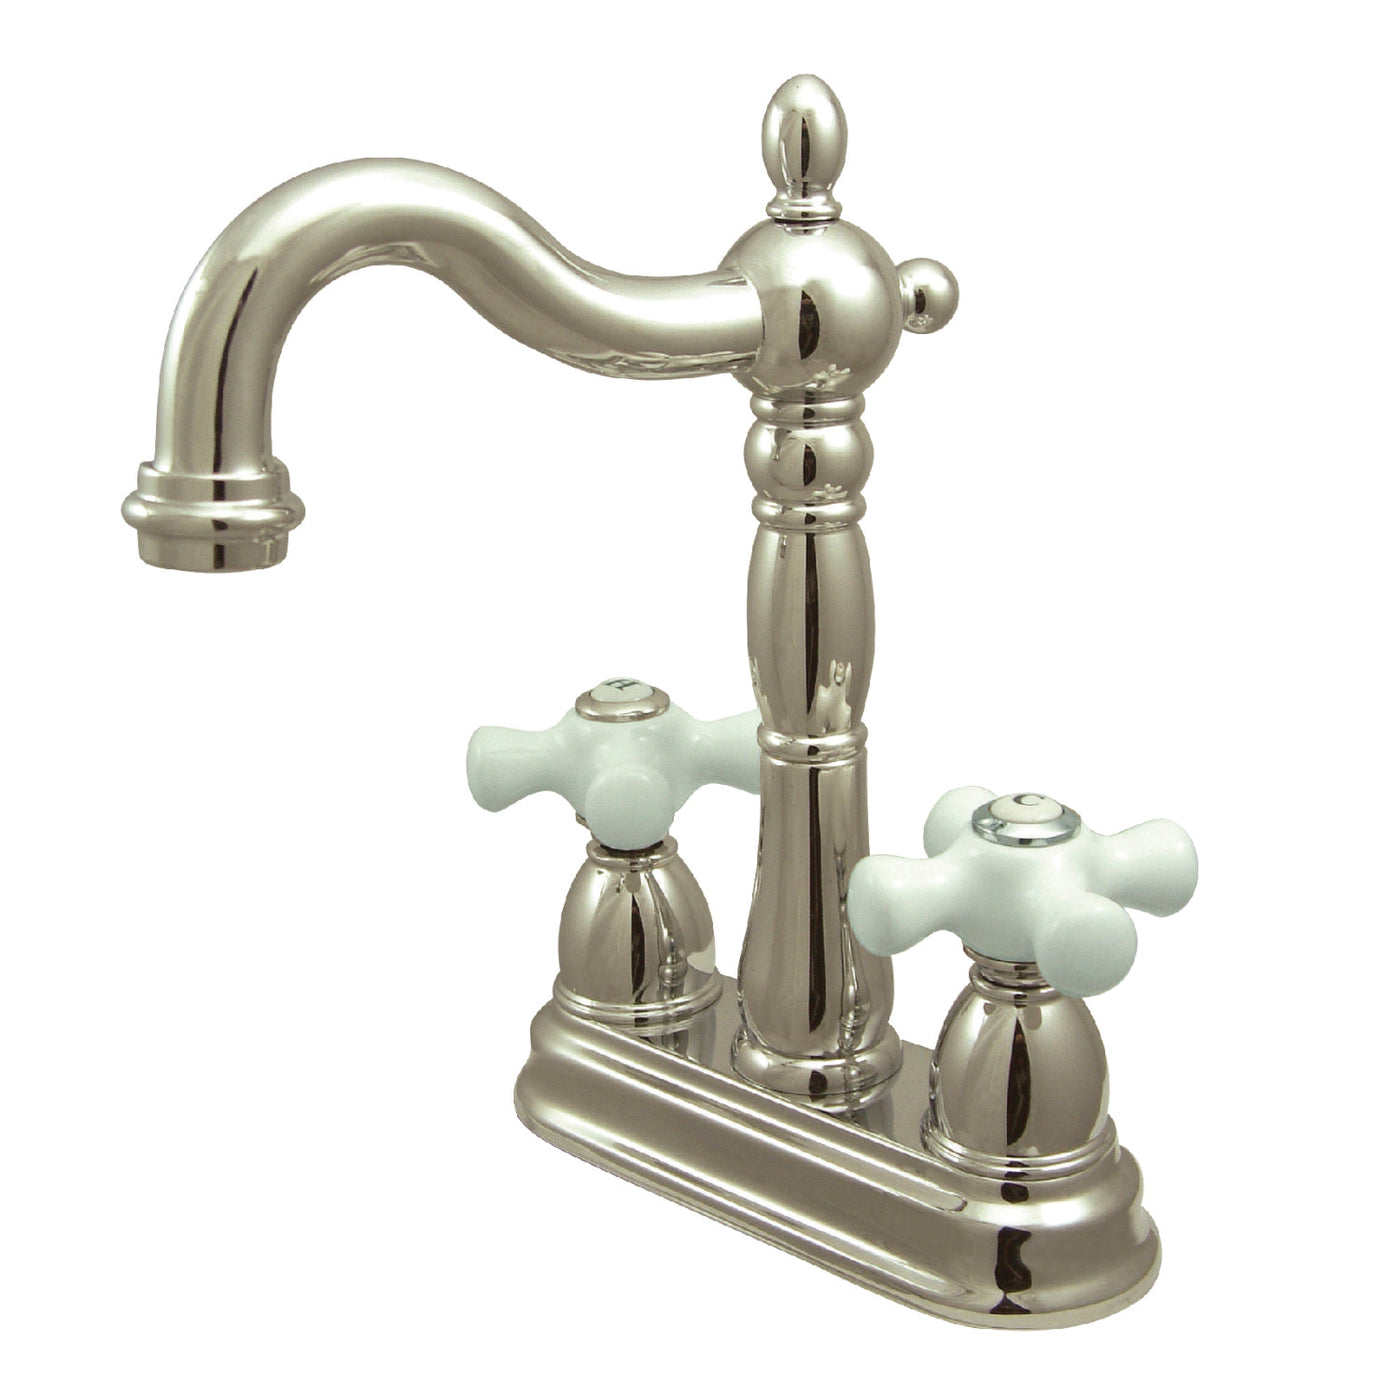 Elements of Design EB1496PX 4-Inch Centerset Bar Faucet, Polished Nickel